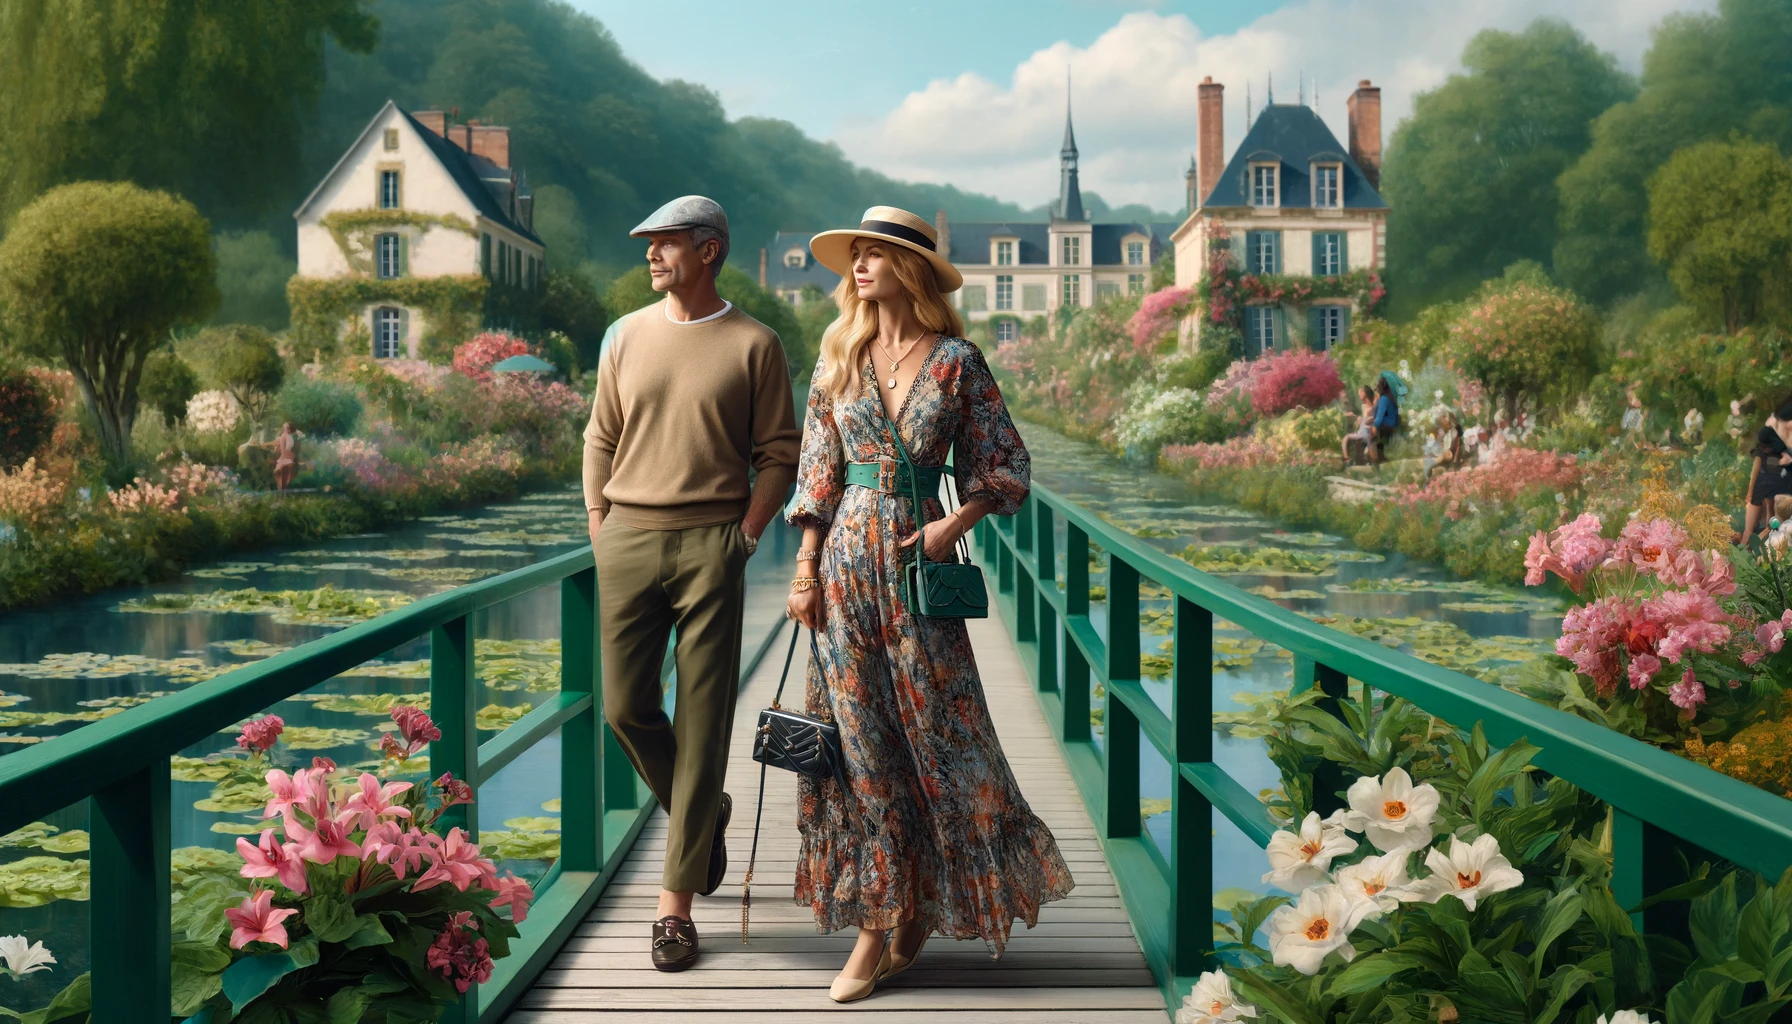 scene of Doug and Kathy Fields in the picturesque village of Giverny, exploring Monet's beloved garden and home